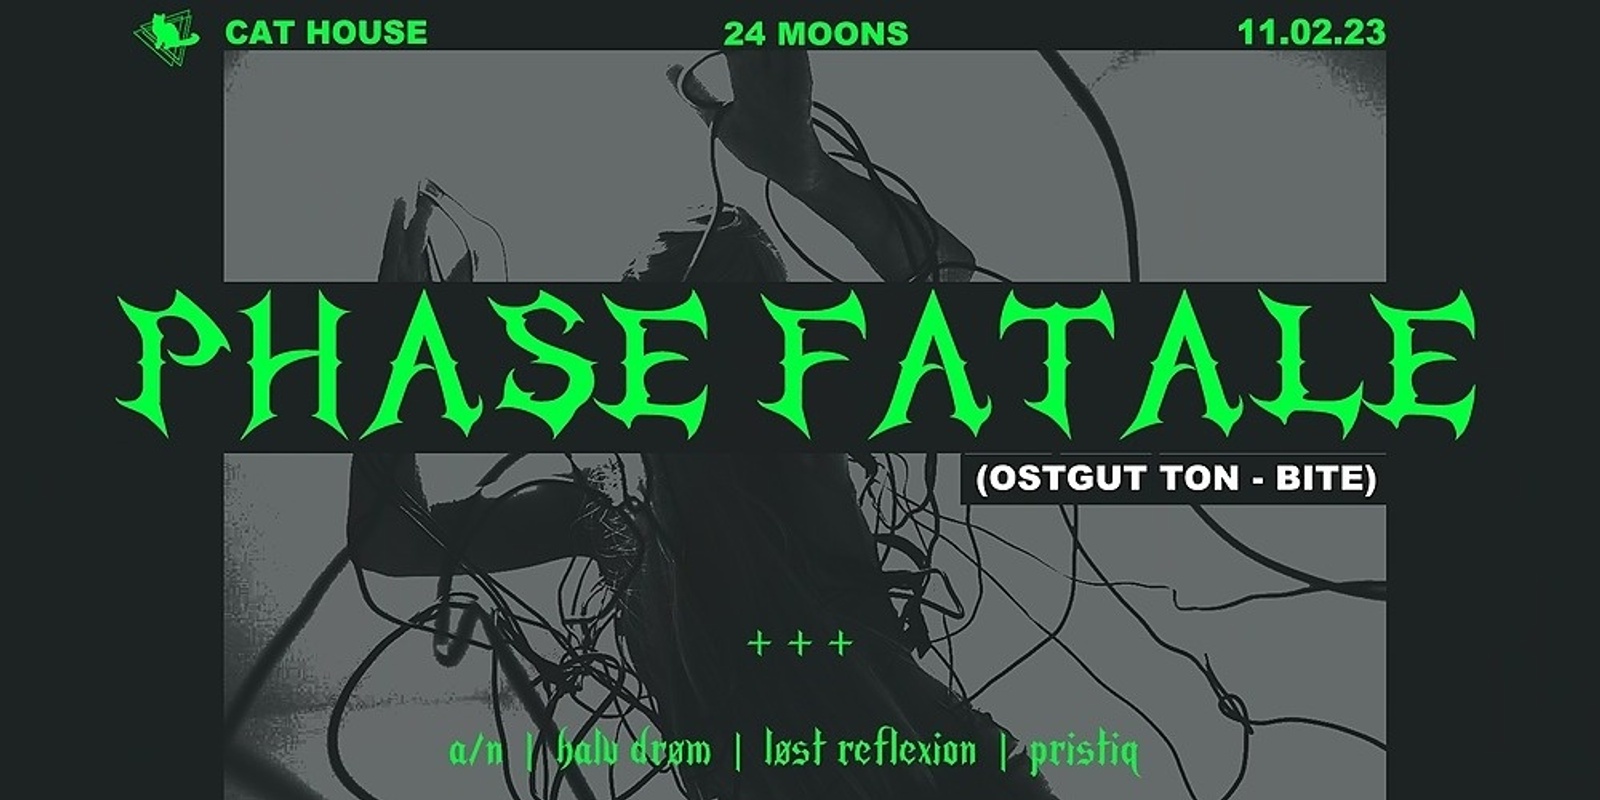 Banner image for Cat House w/ Phase Fatale (Ostgut Ton - Bite)